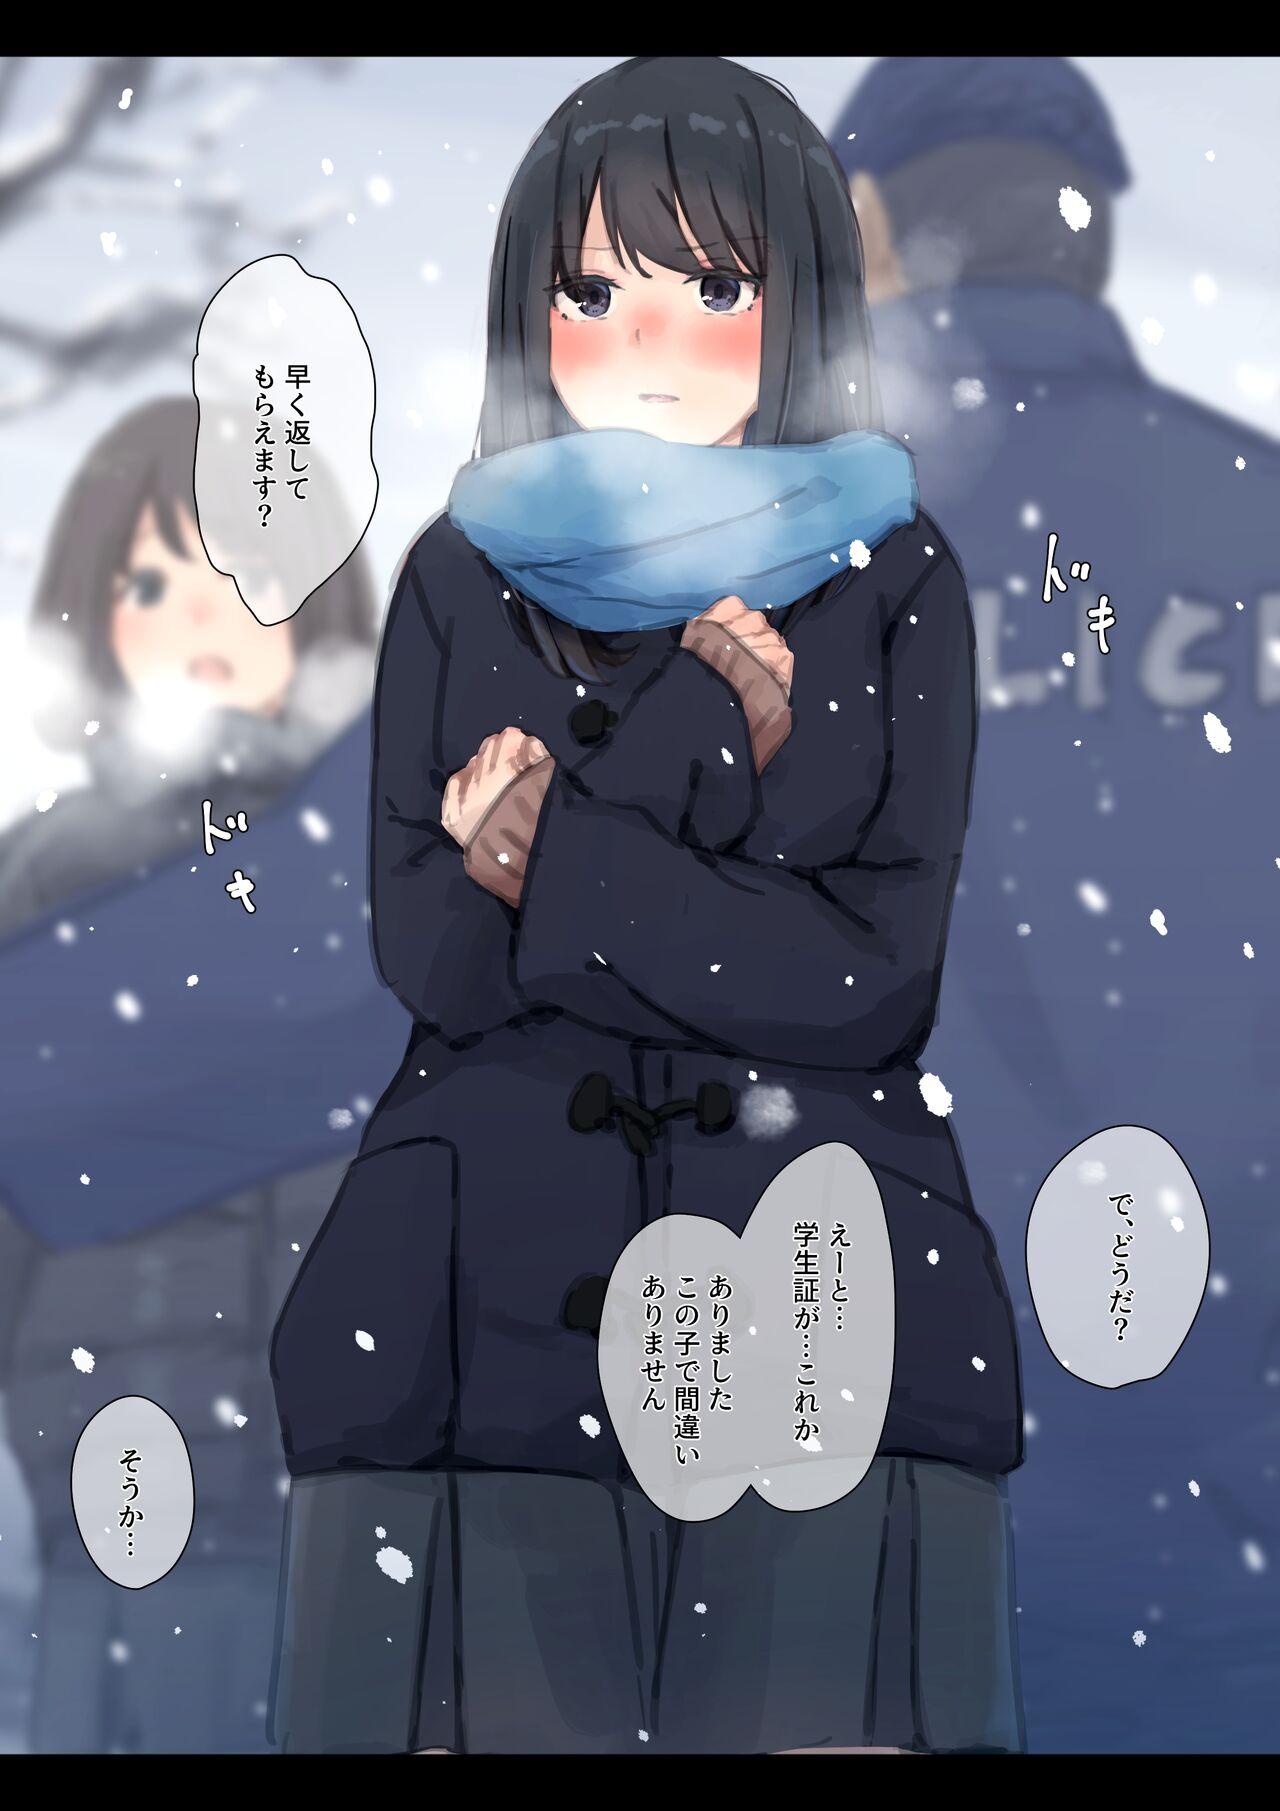 [Yukimuramaru] Public property Sex Slave Girl - Ex - Collection in the Snow - [Digital] [Ongoing] 14